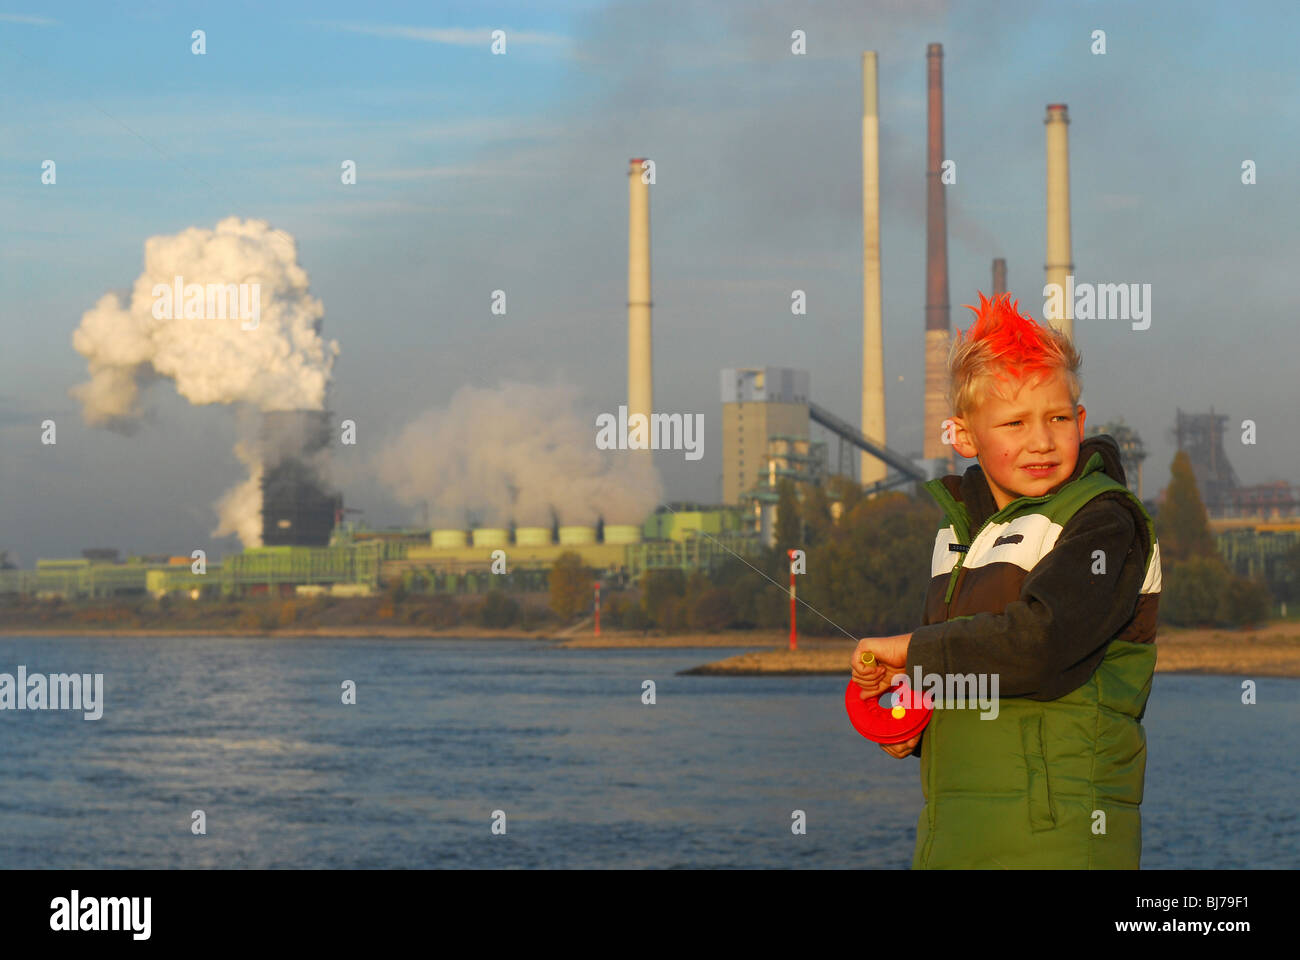 Boy standing by a river with the ThyssenKrupp Stahl AG coking plant in the background, Duisburg, Germany Stock Photo